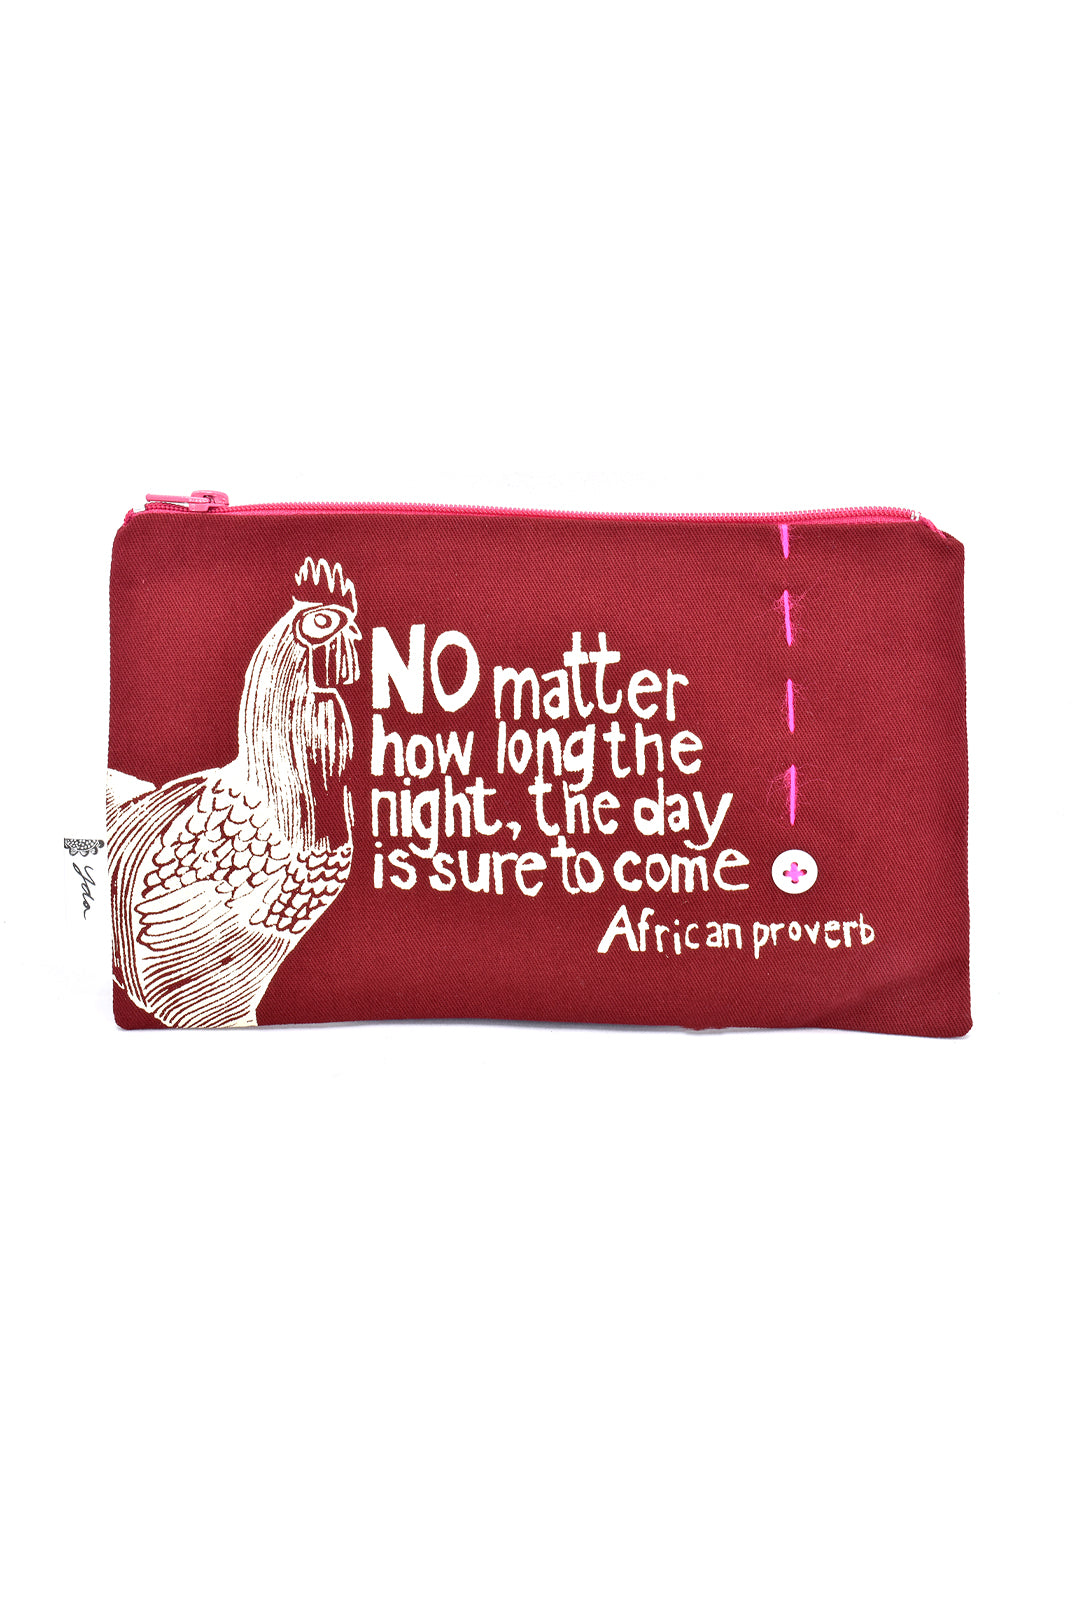 Crimson "The Day is Sure to Come" African Proverb Flat Pouch Default Title